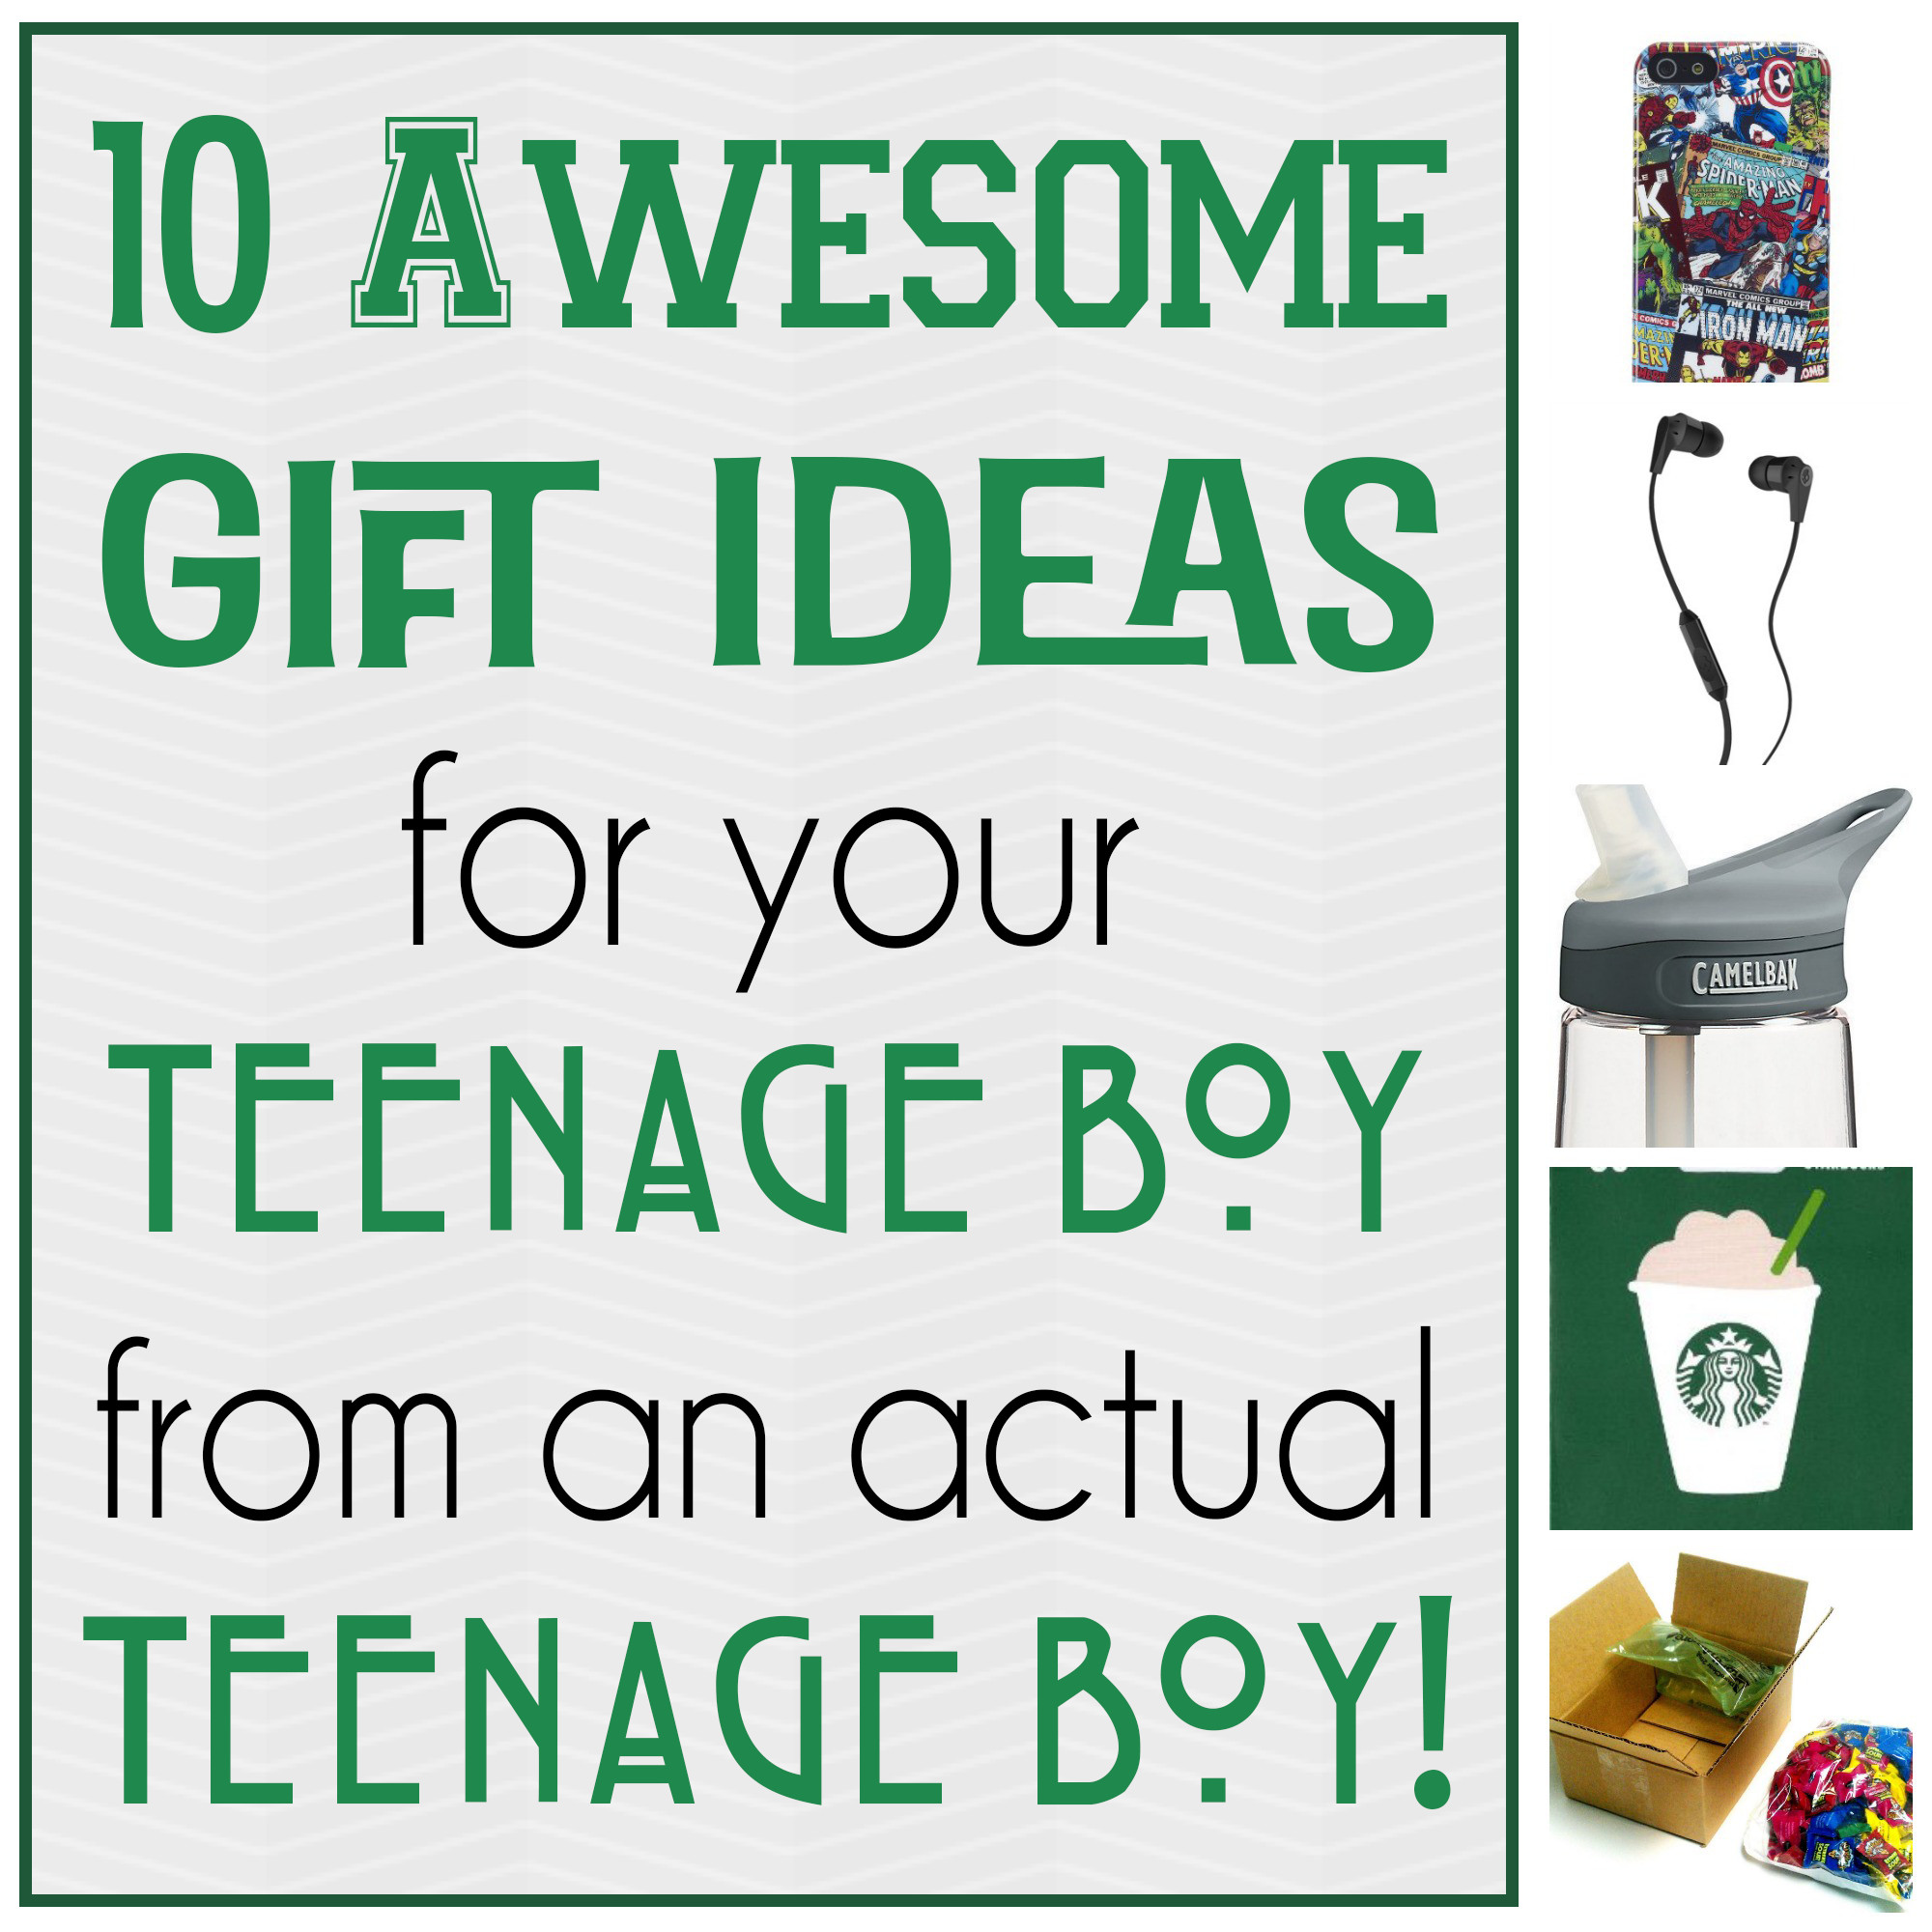 Great Gift Ideas For Teen Boys
 10 Awesome Gift Ideas for Teenage Boys